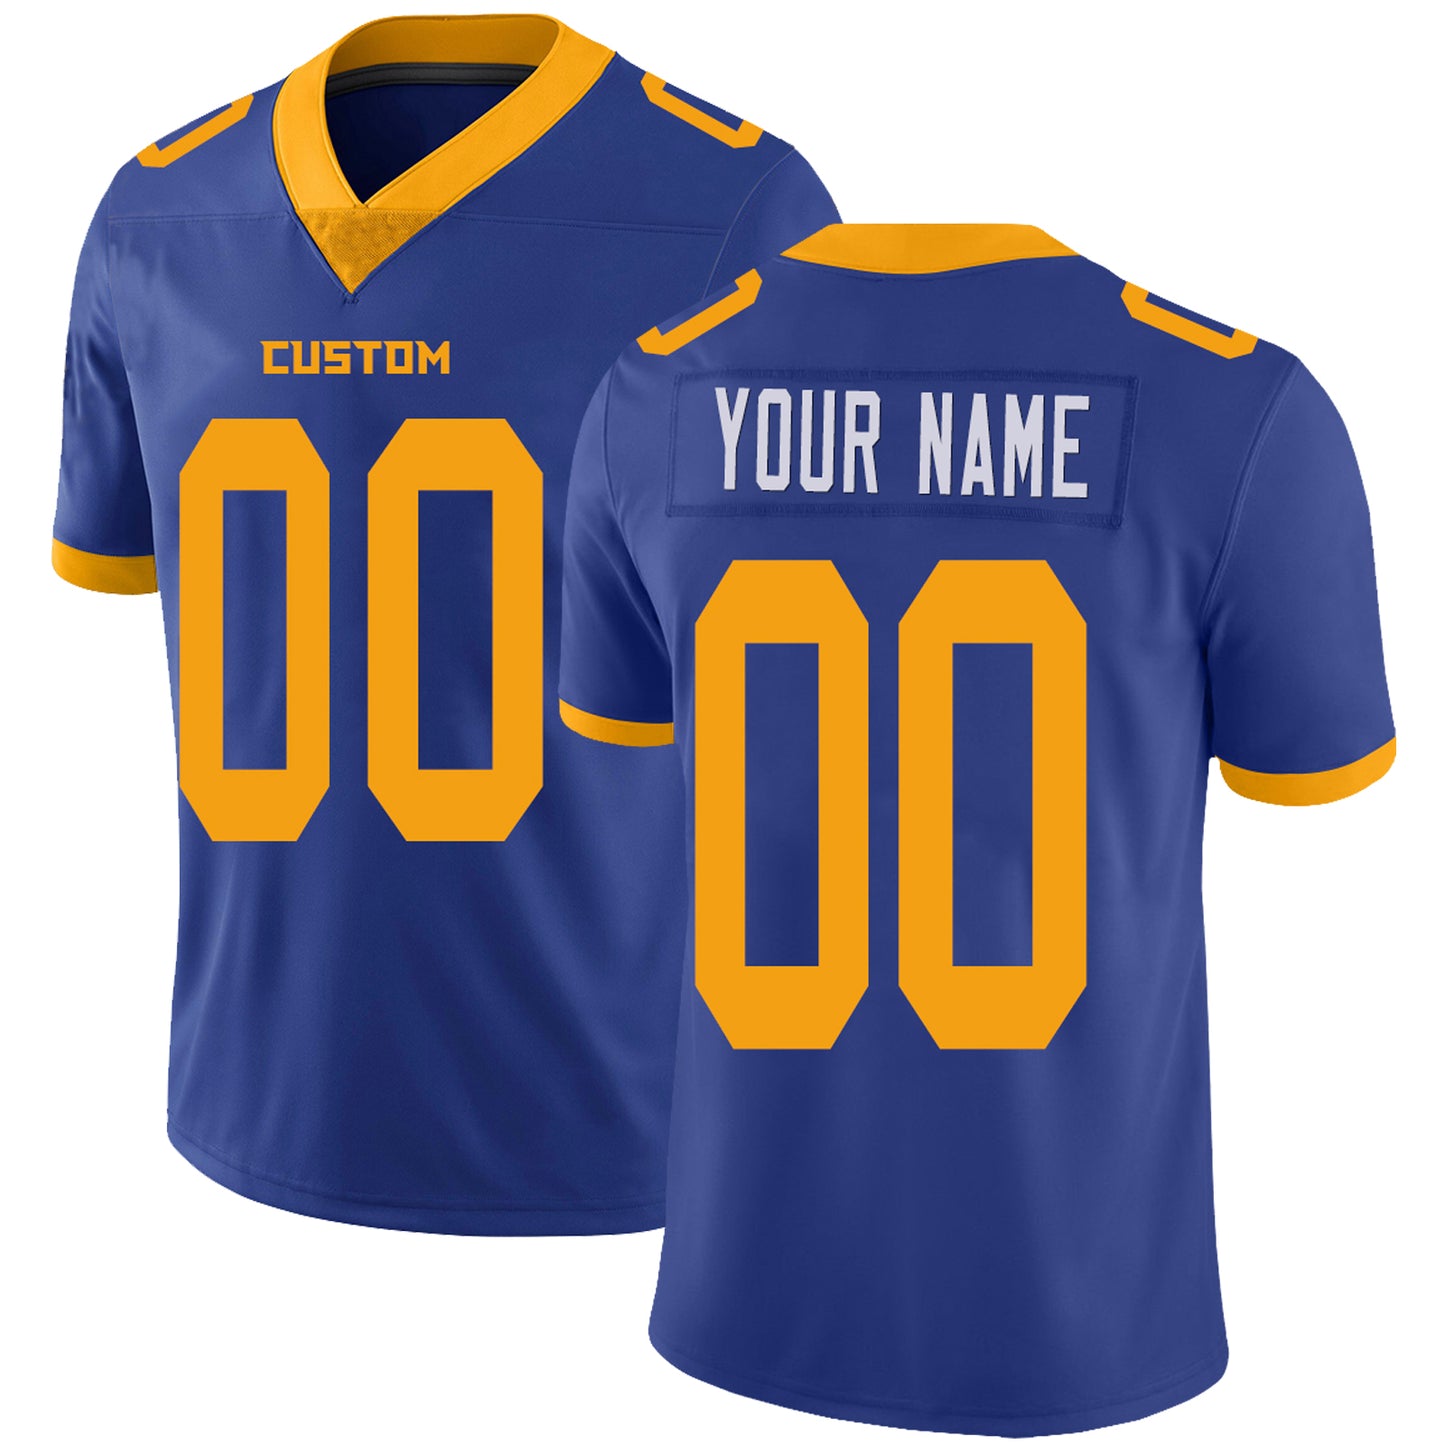 Design your own custom jersey with your personalised name